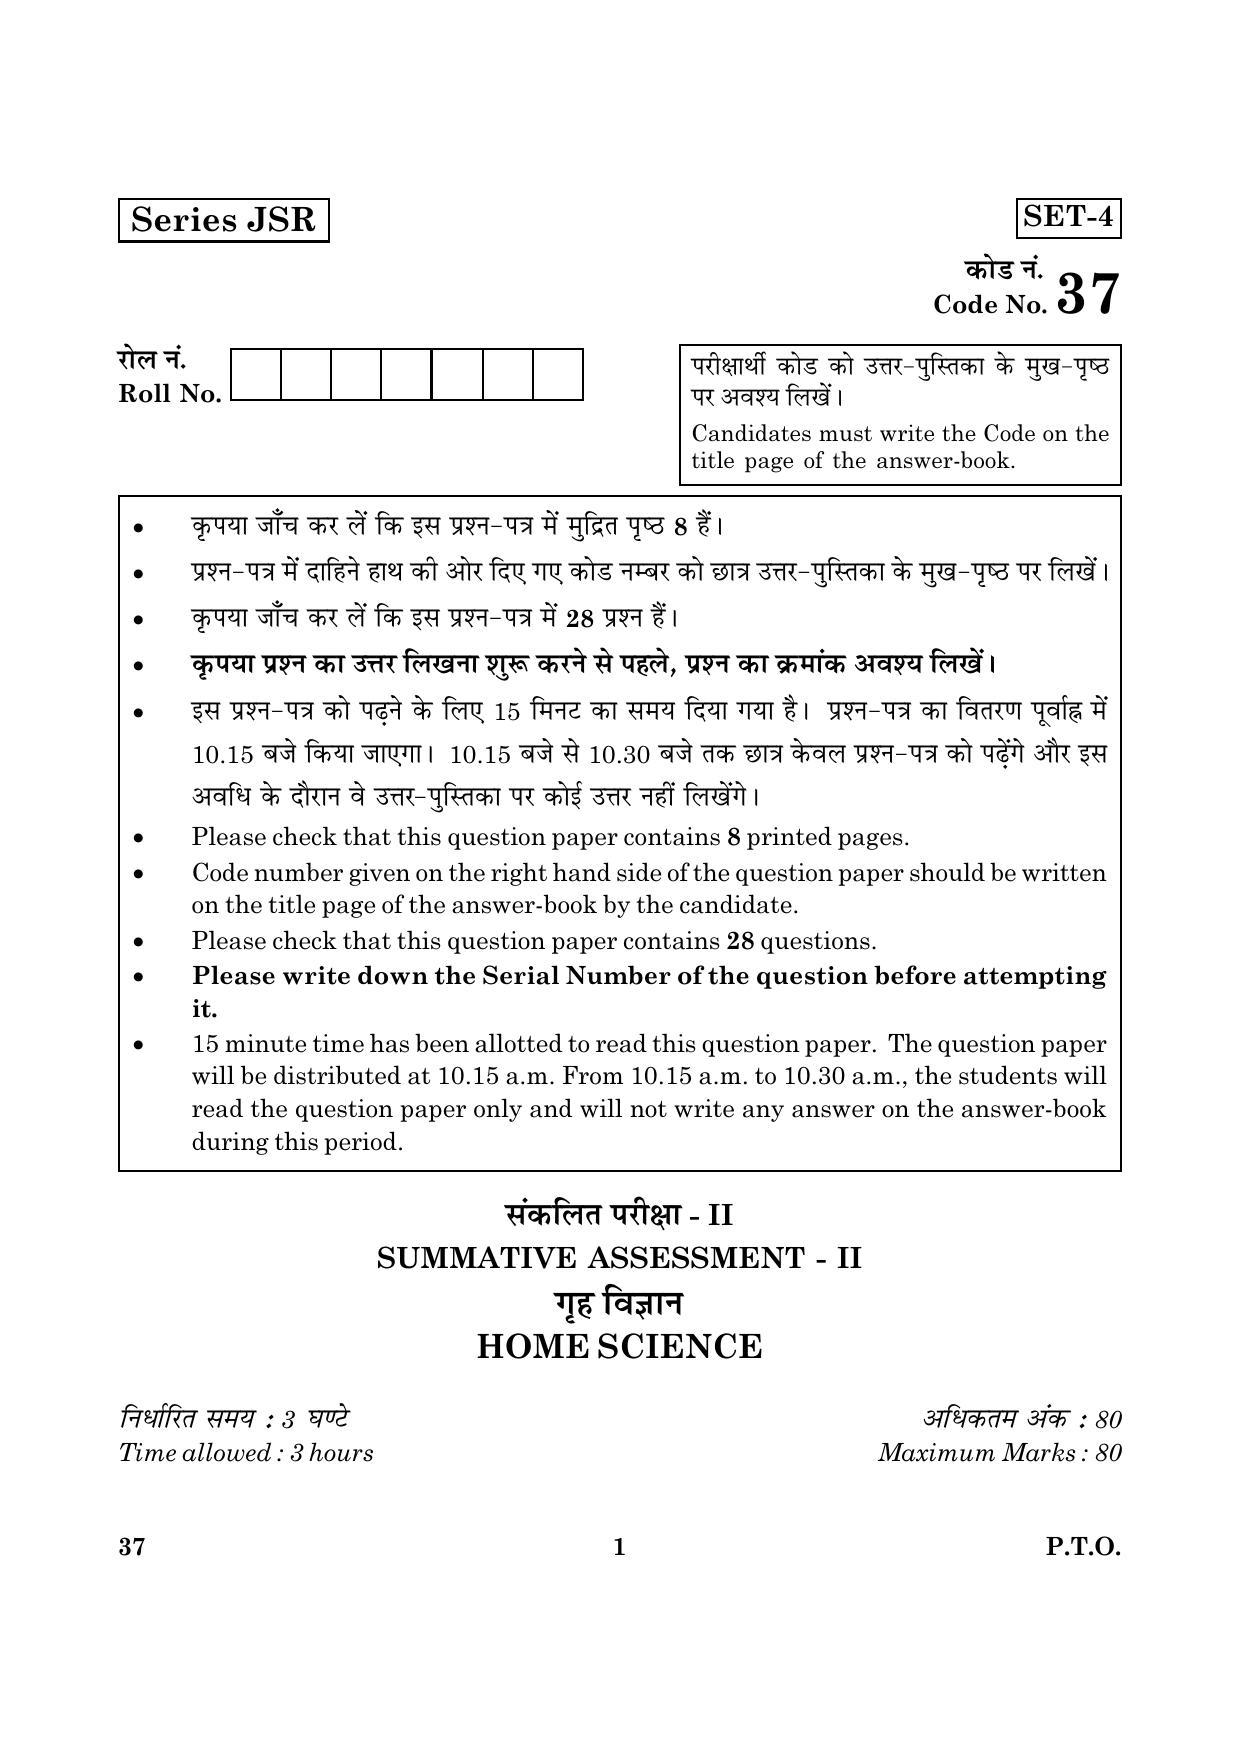 CBSE Class 10 037 Home Science 2016 Question Paper - Page 1